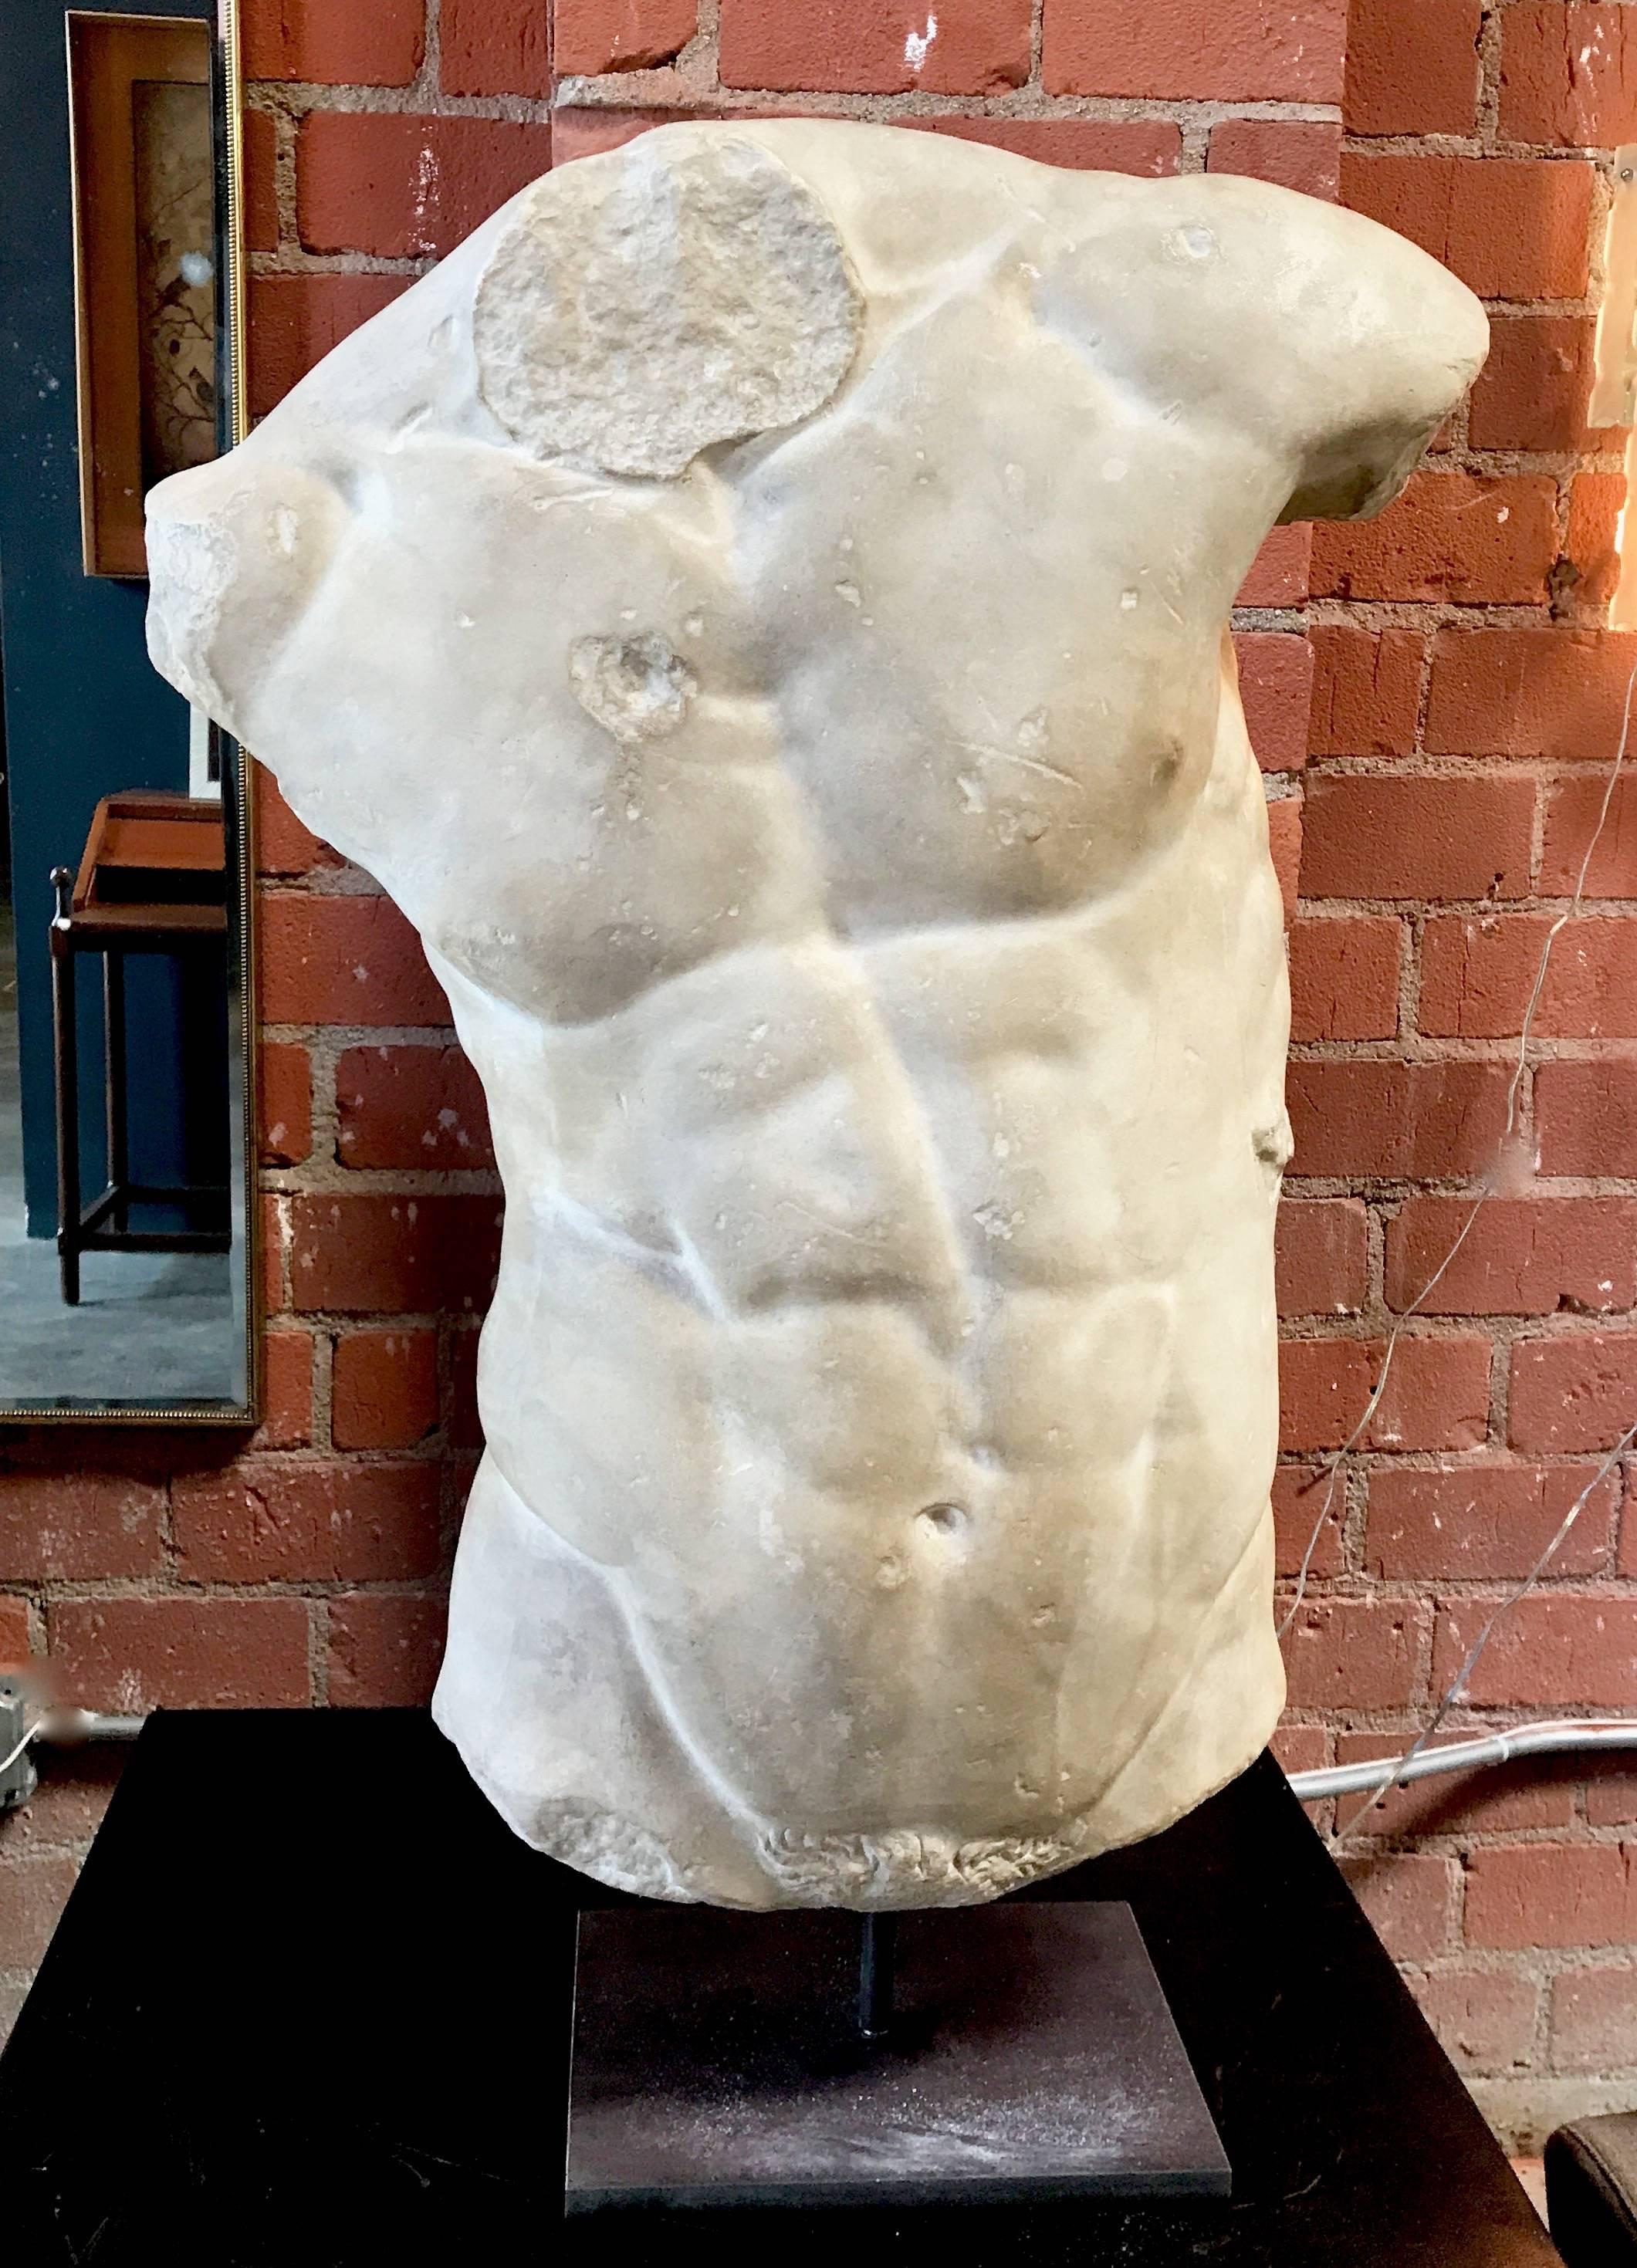 Gaddi's Torso, plaster bust, Copy in Scale 1/1
The original marble Gaddi Torso displayed in the Classical sculpture room of the Uffizi, Florence, is a Hellenistic sculpture of the 2nd century BCE.